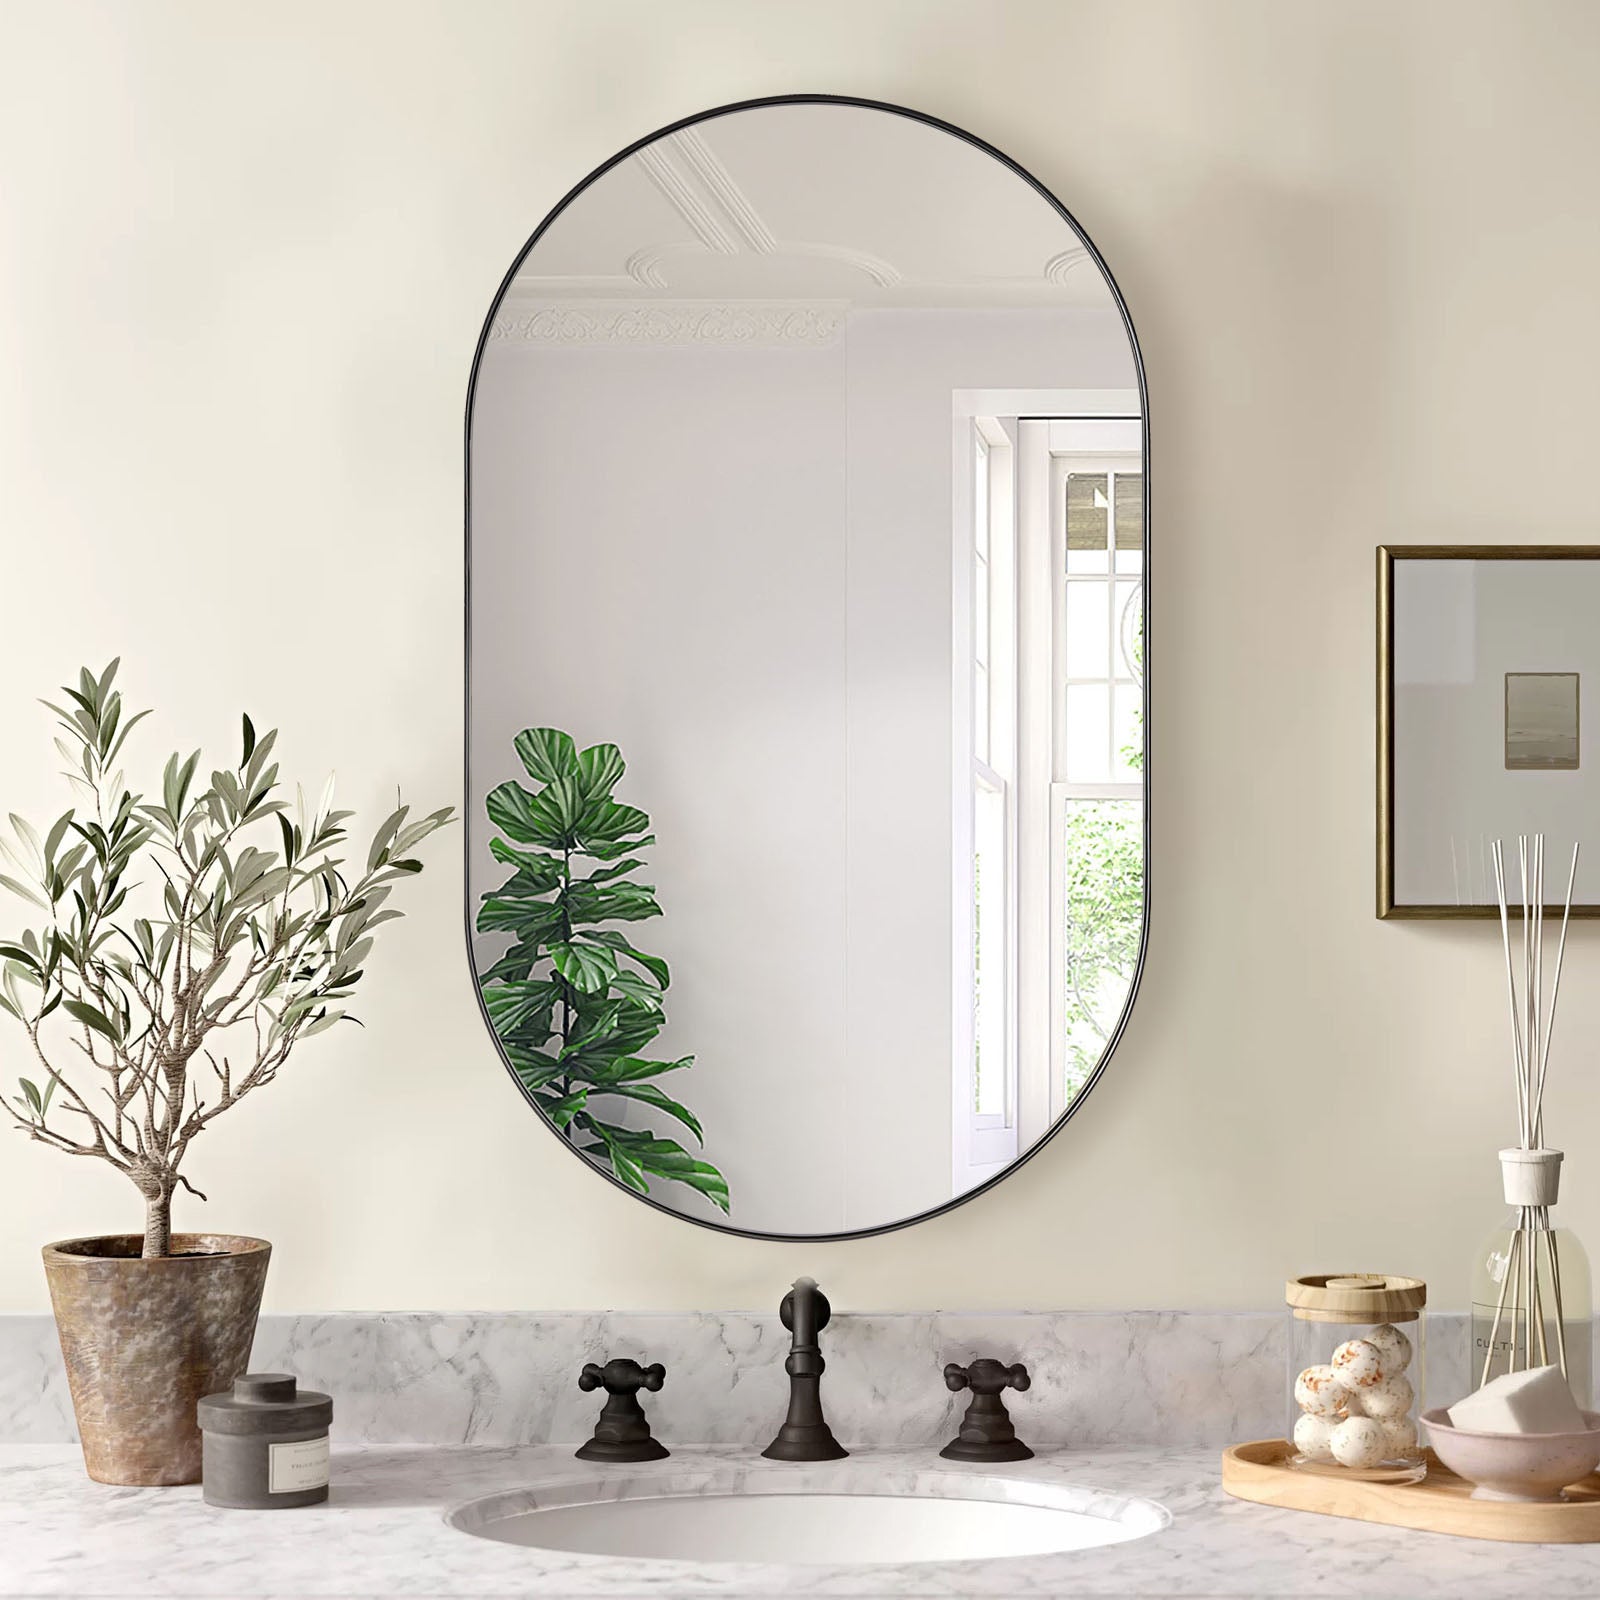 Contemporary Pill / Capsule Shaped Bathroom Wall Mirrors | Stainless Steel Framed